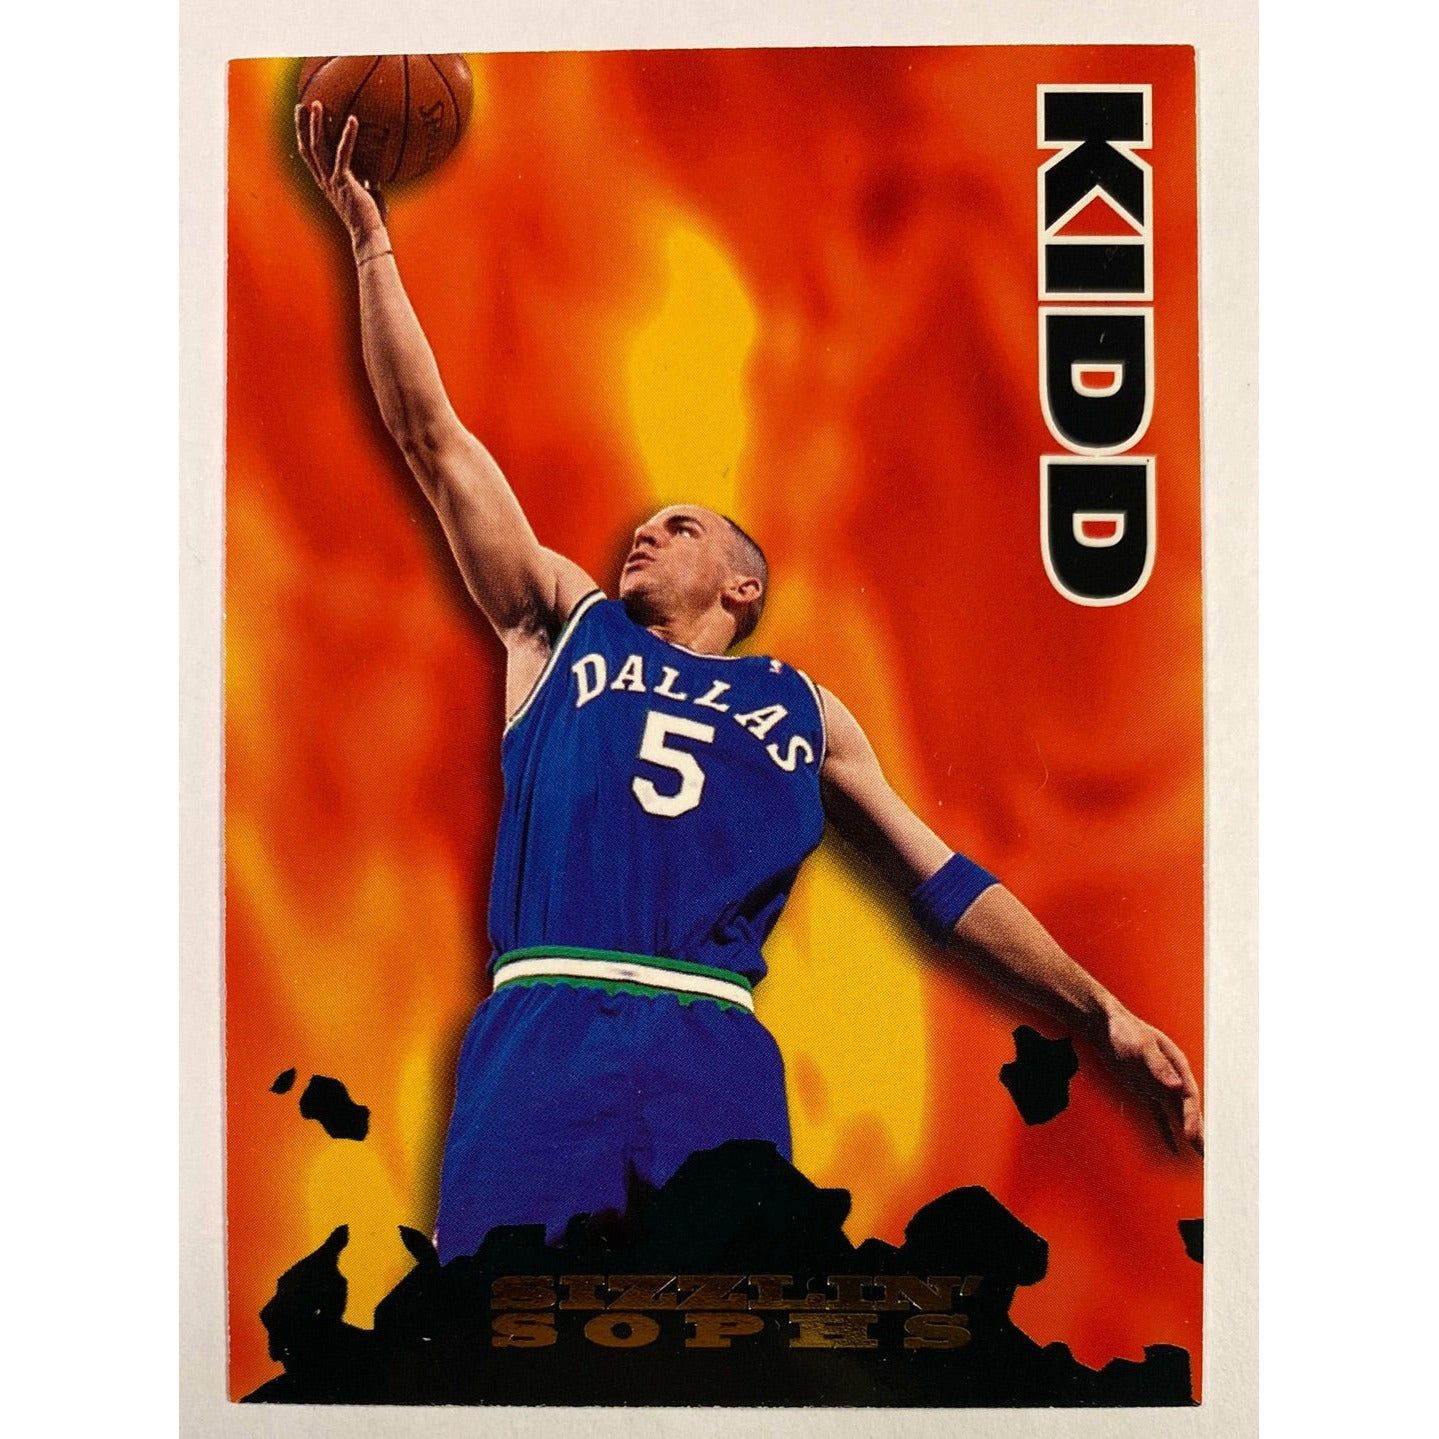  1995-96 Hoops Jason Kidd Sizzlin’ Sophs  Local Legends Cards & Collectibles